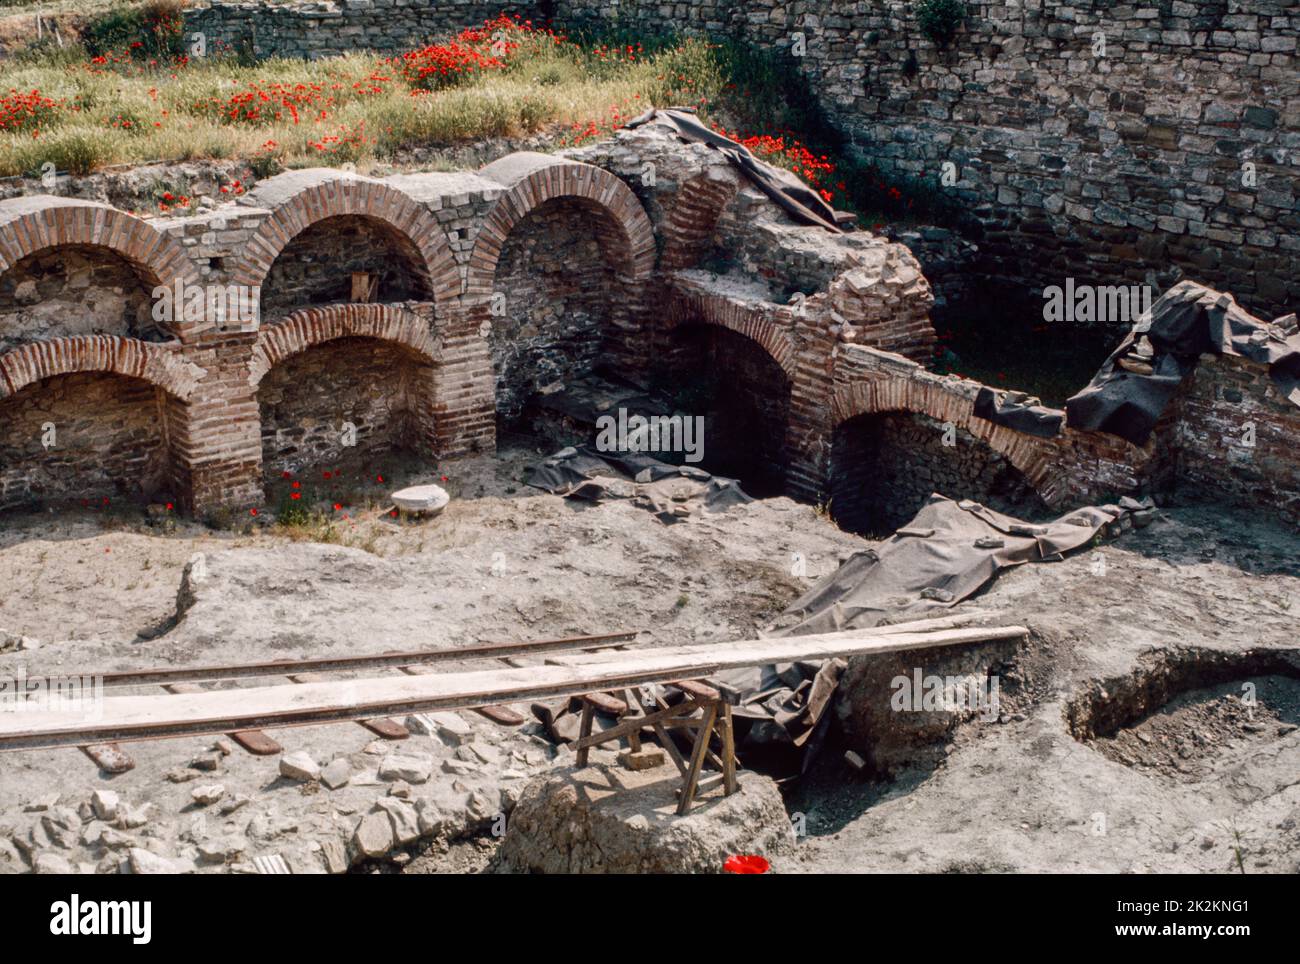 Excavations in progress near South Wall in Stobi or Stoboi (in former Yugoslavia) - an ancient town of Greek Paeonia, later conquered by Macedon, and finally turned into the capital of the Roman province of Macedonia Salutaris. May 1980.  Archival scan from a slide. Stock Photo